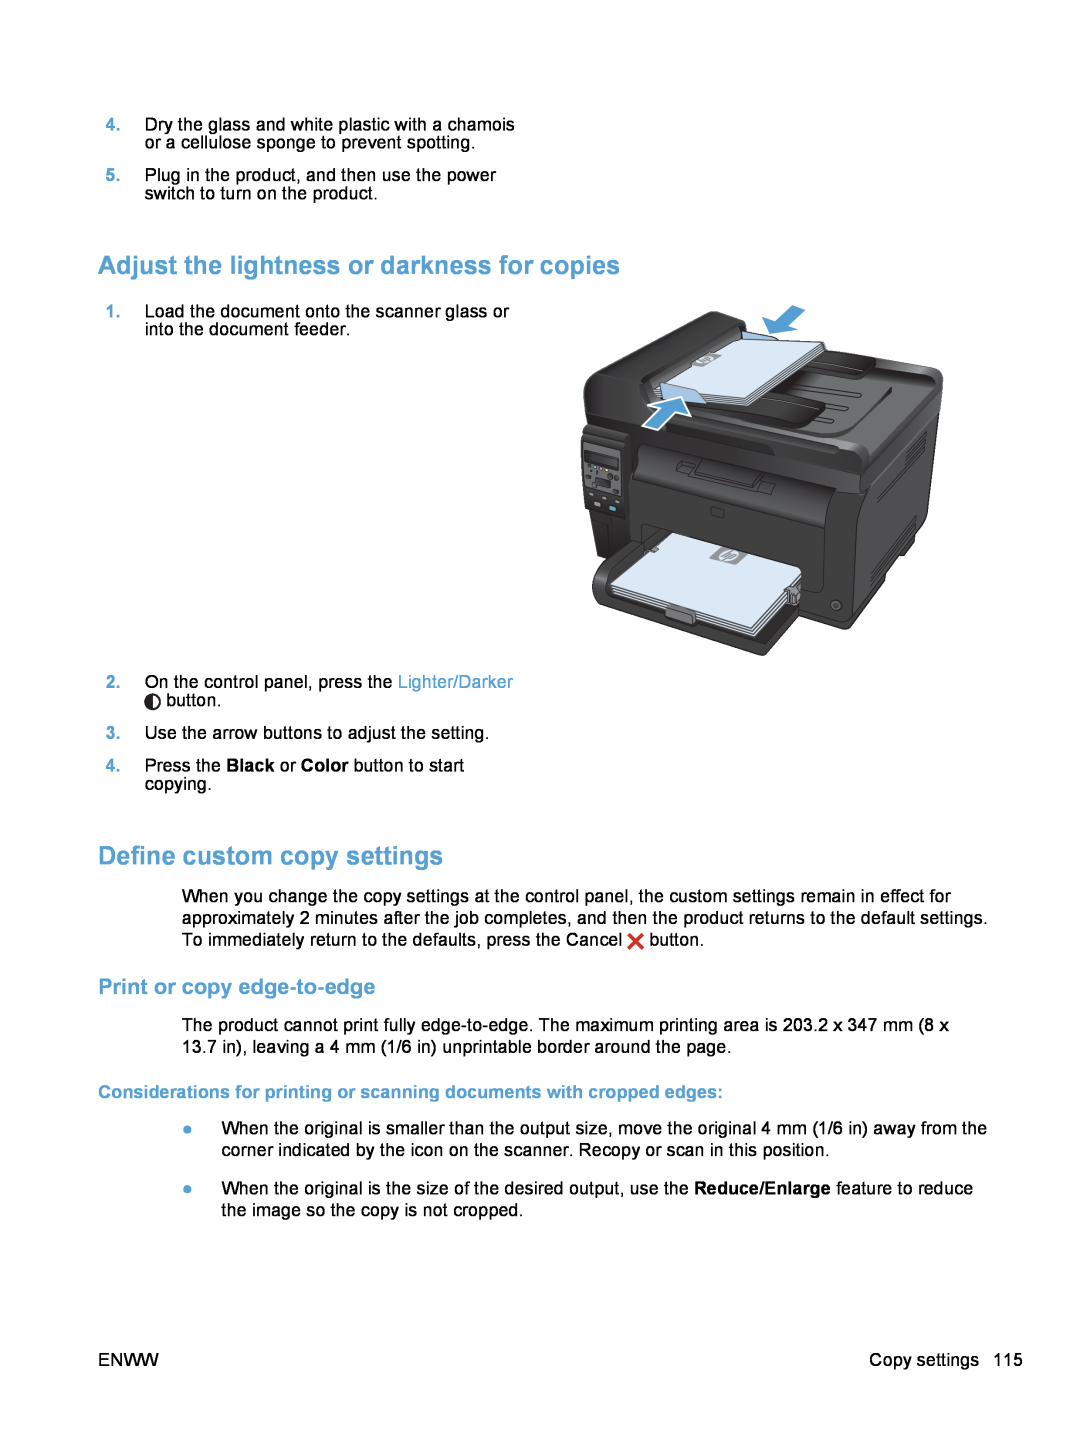 HP 100 COLOR CE866ABGJ, 100 COLOR MFP M175 manual Adjust the lightness or darkness for copies, Define custom copy settings 